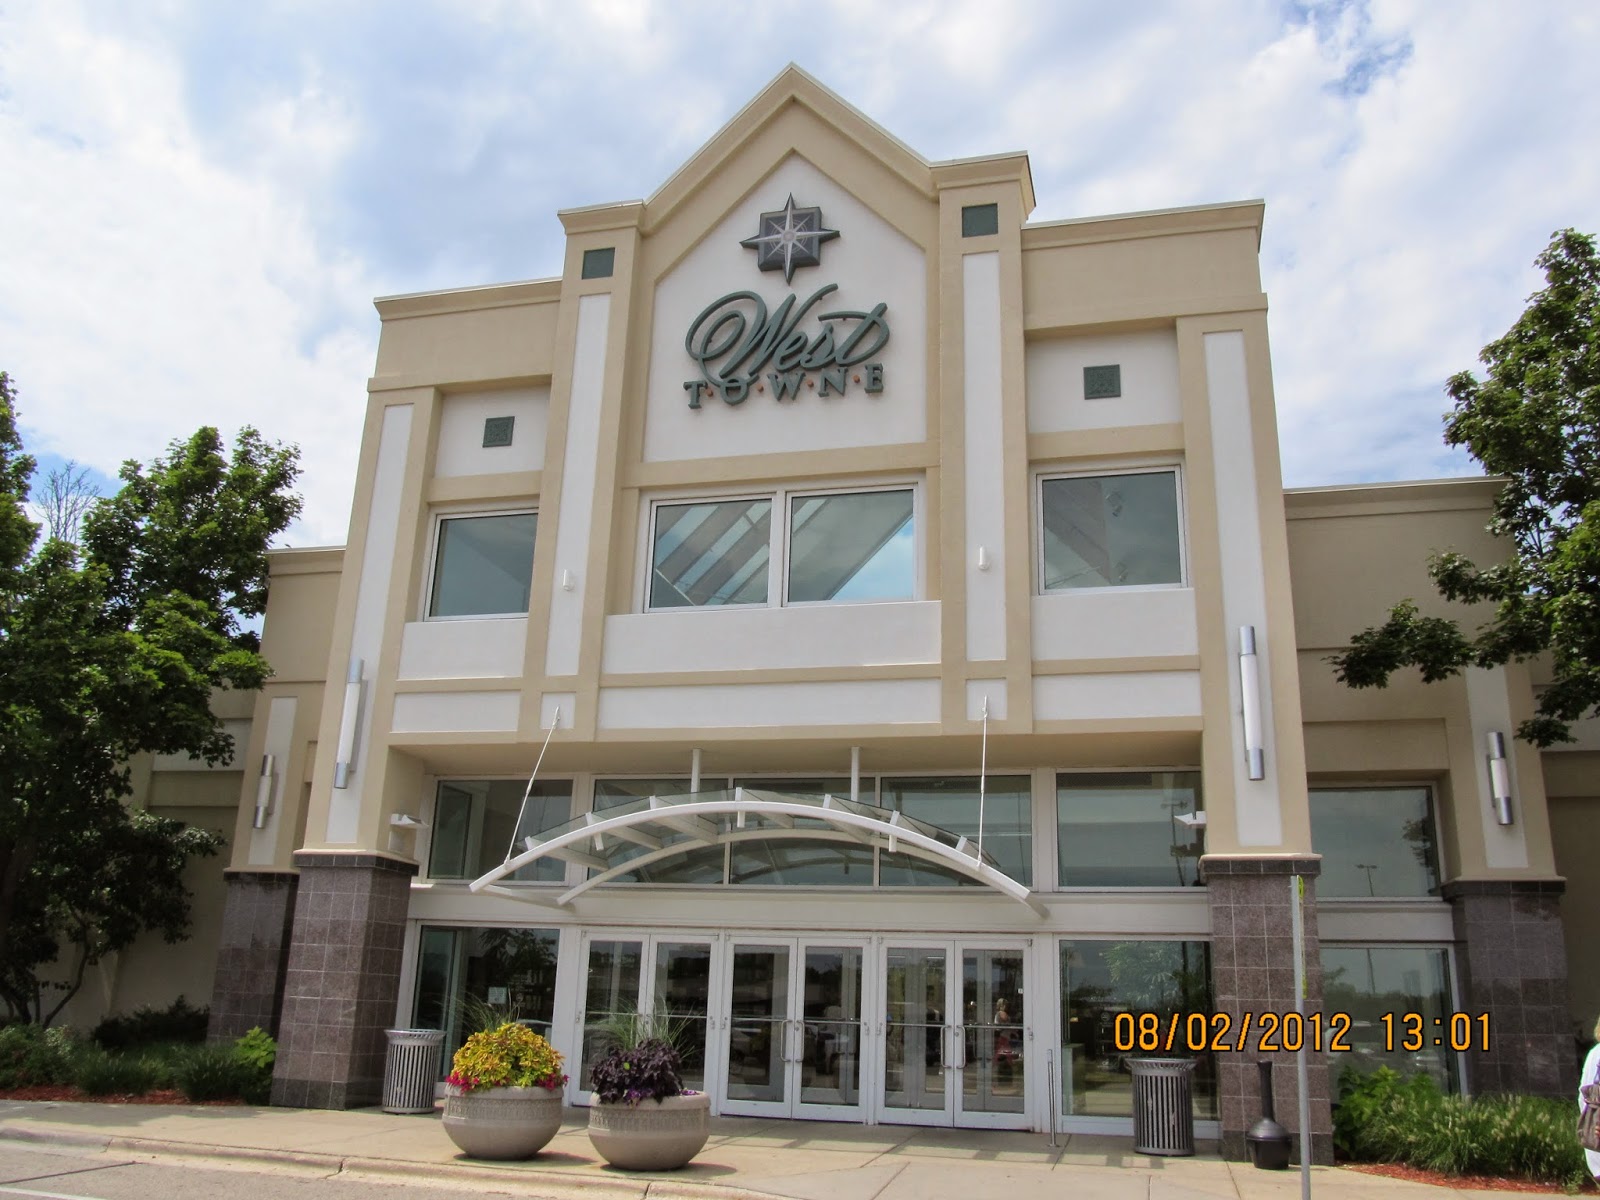 Trip to the Mall: West Towne Mall- ( Madison, WI)